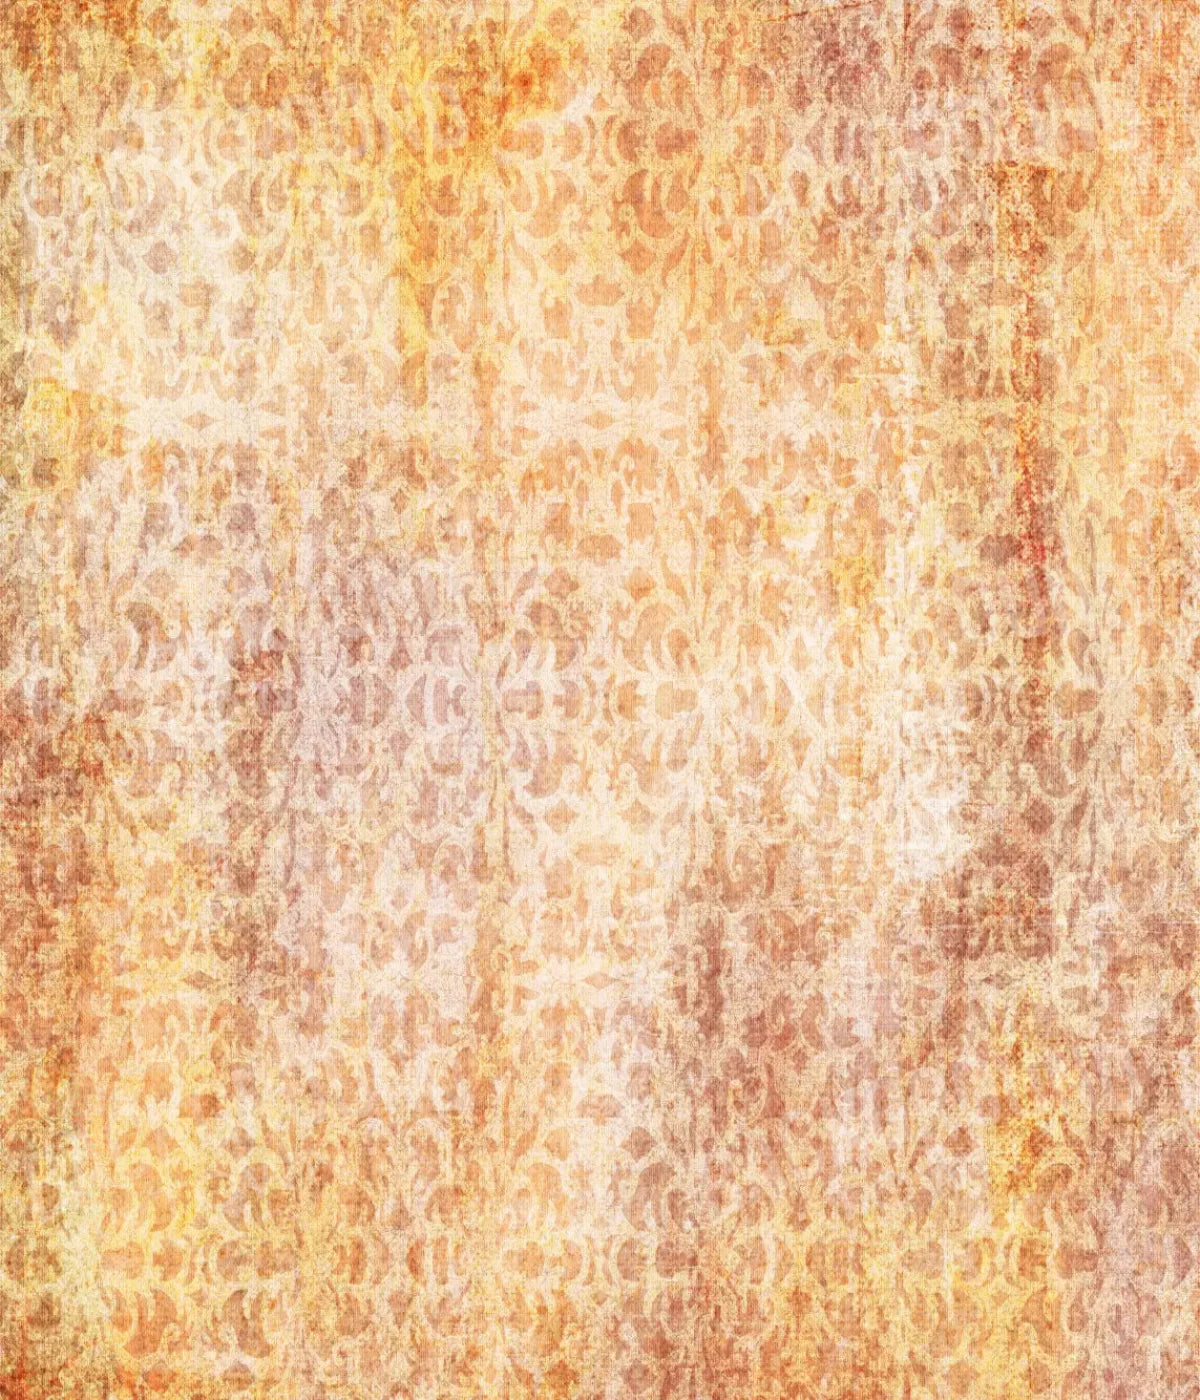 Apricot 10X12 Ultracloth ( 120 X 144 Inch ) Backdrop